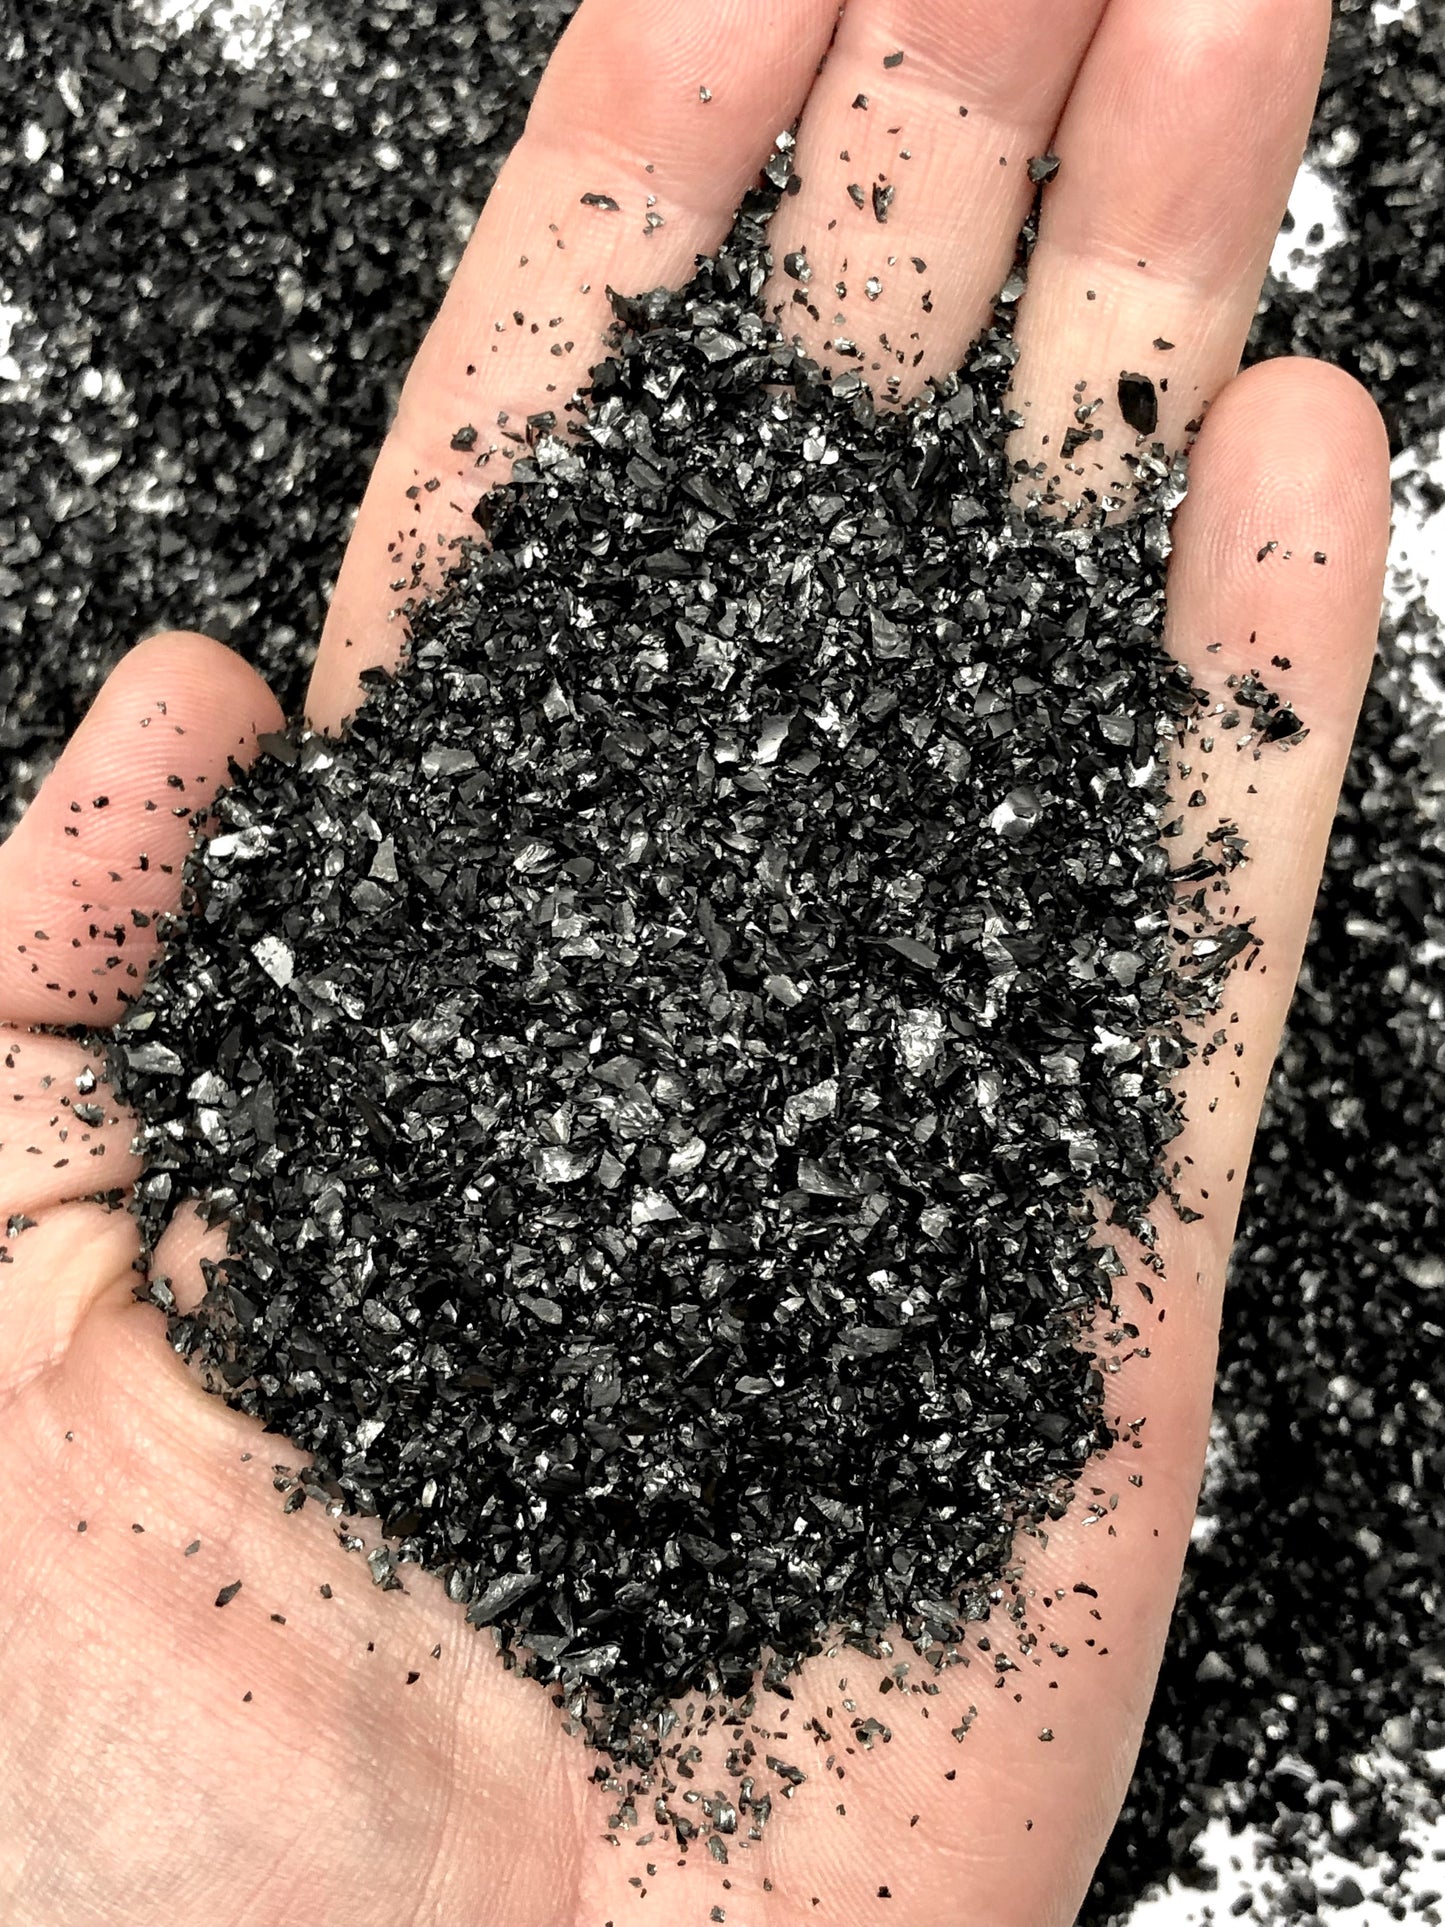 Crushed Black Jet from The United States, Medium Crush, Sand Size, 2mm - 0.25mm